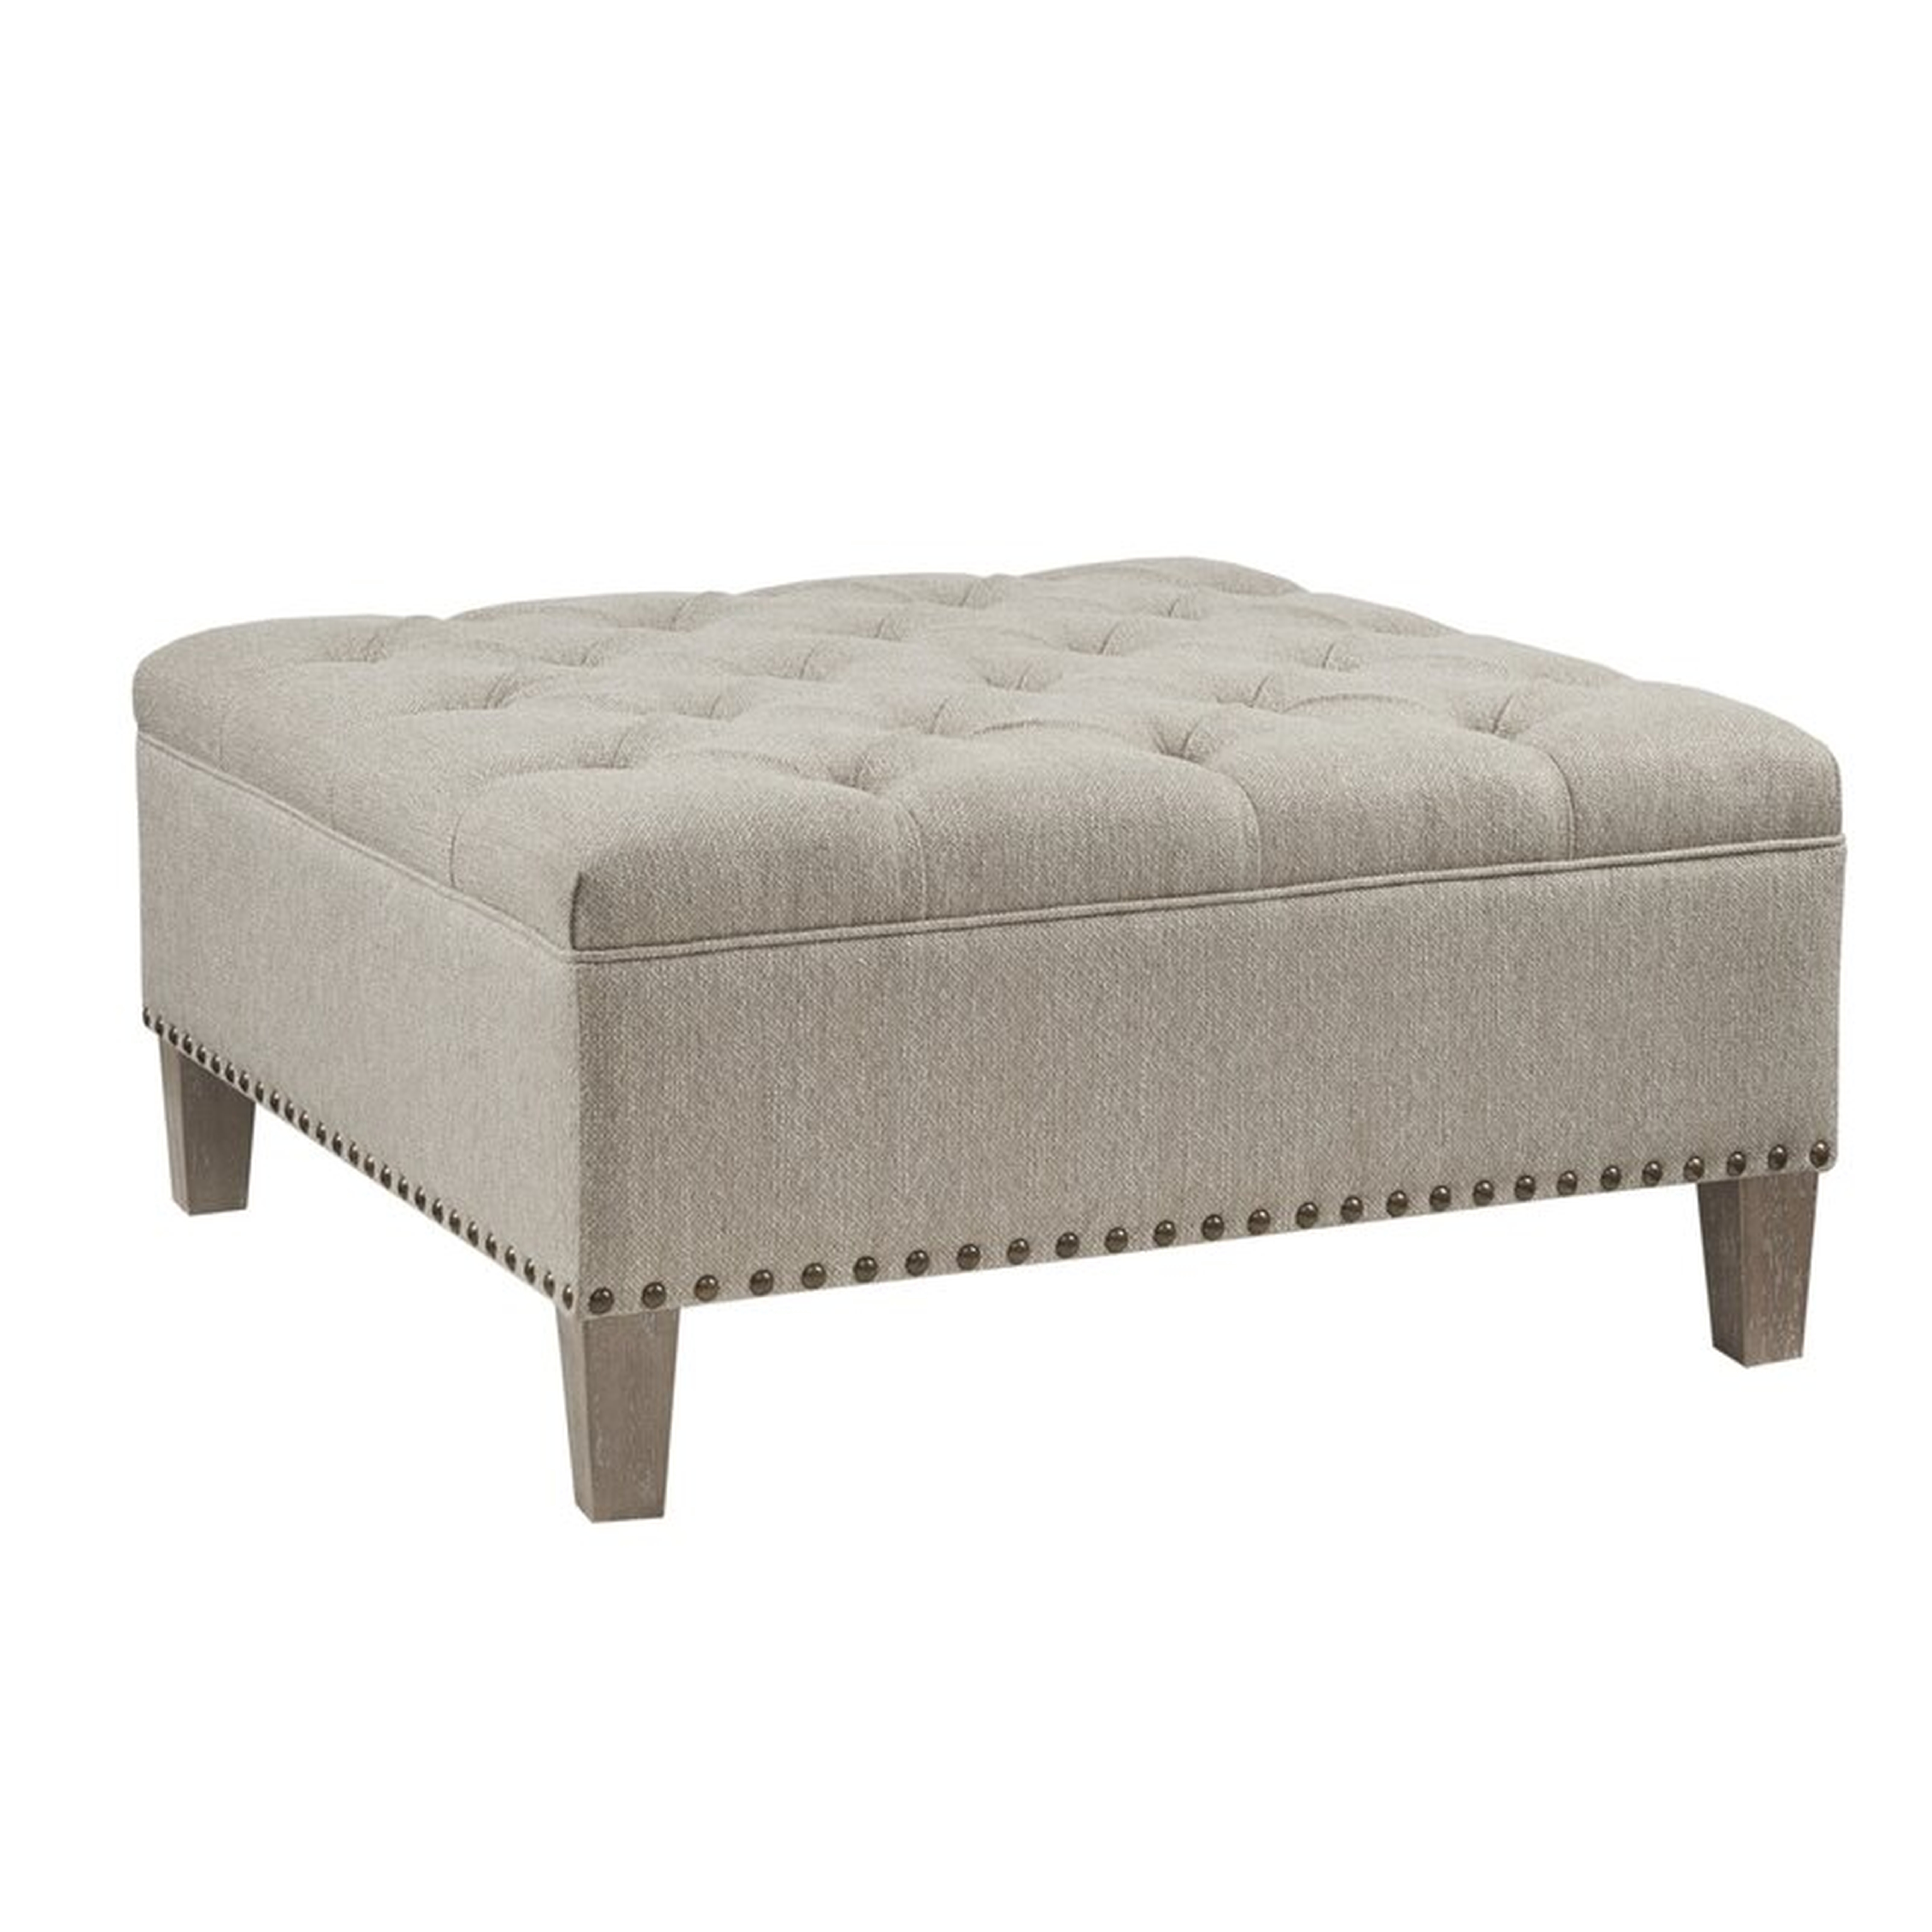 Sigler Wide Tufted Square Cocktail Ottoman, 35.5" - Wayfair